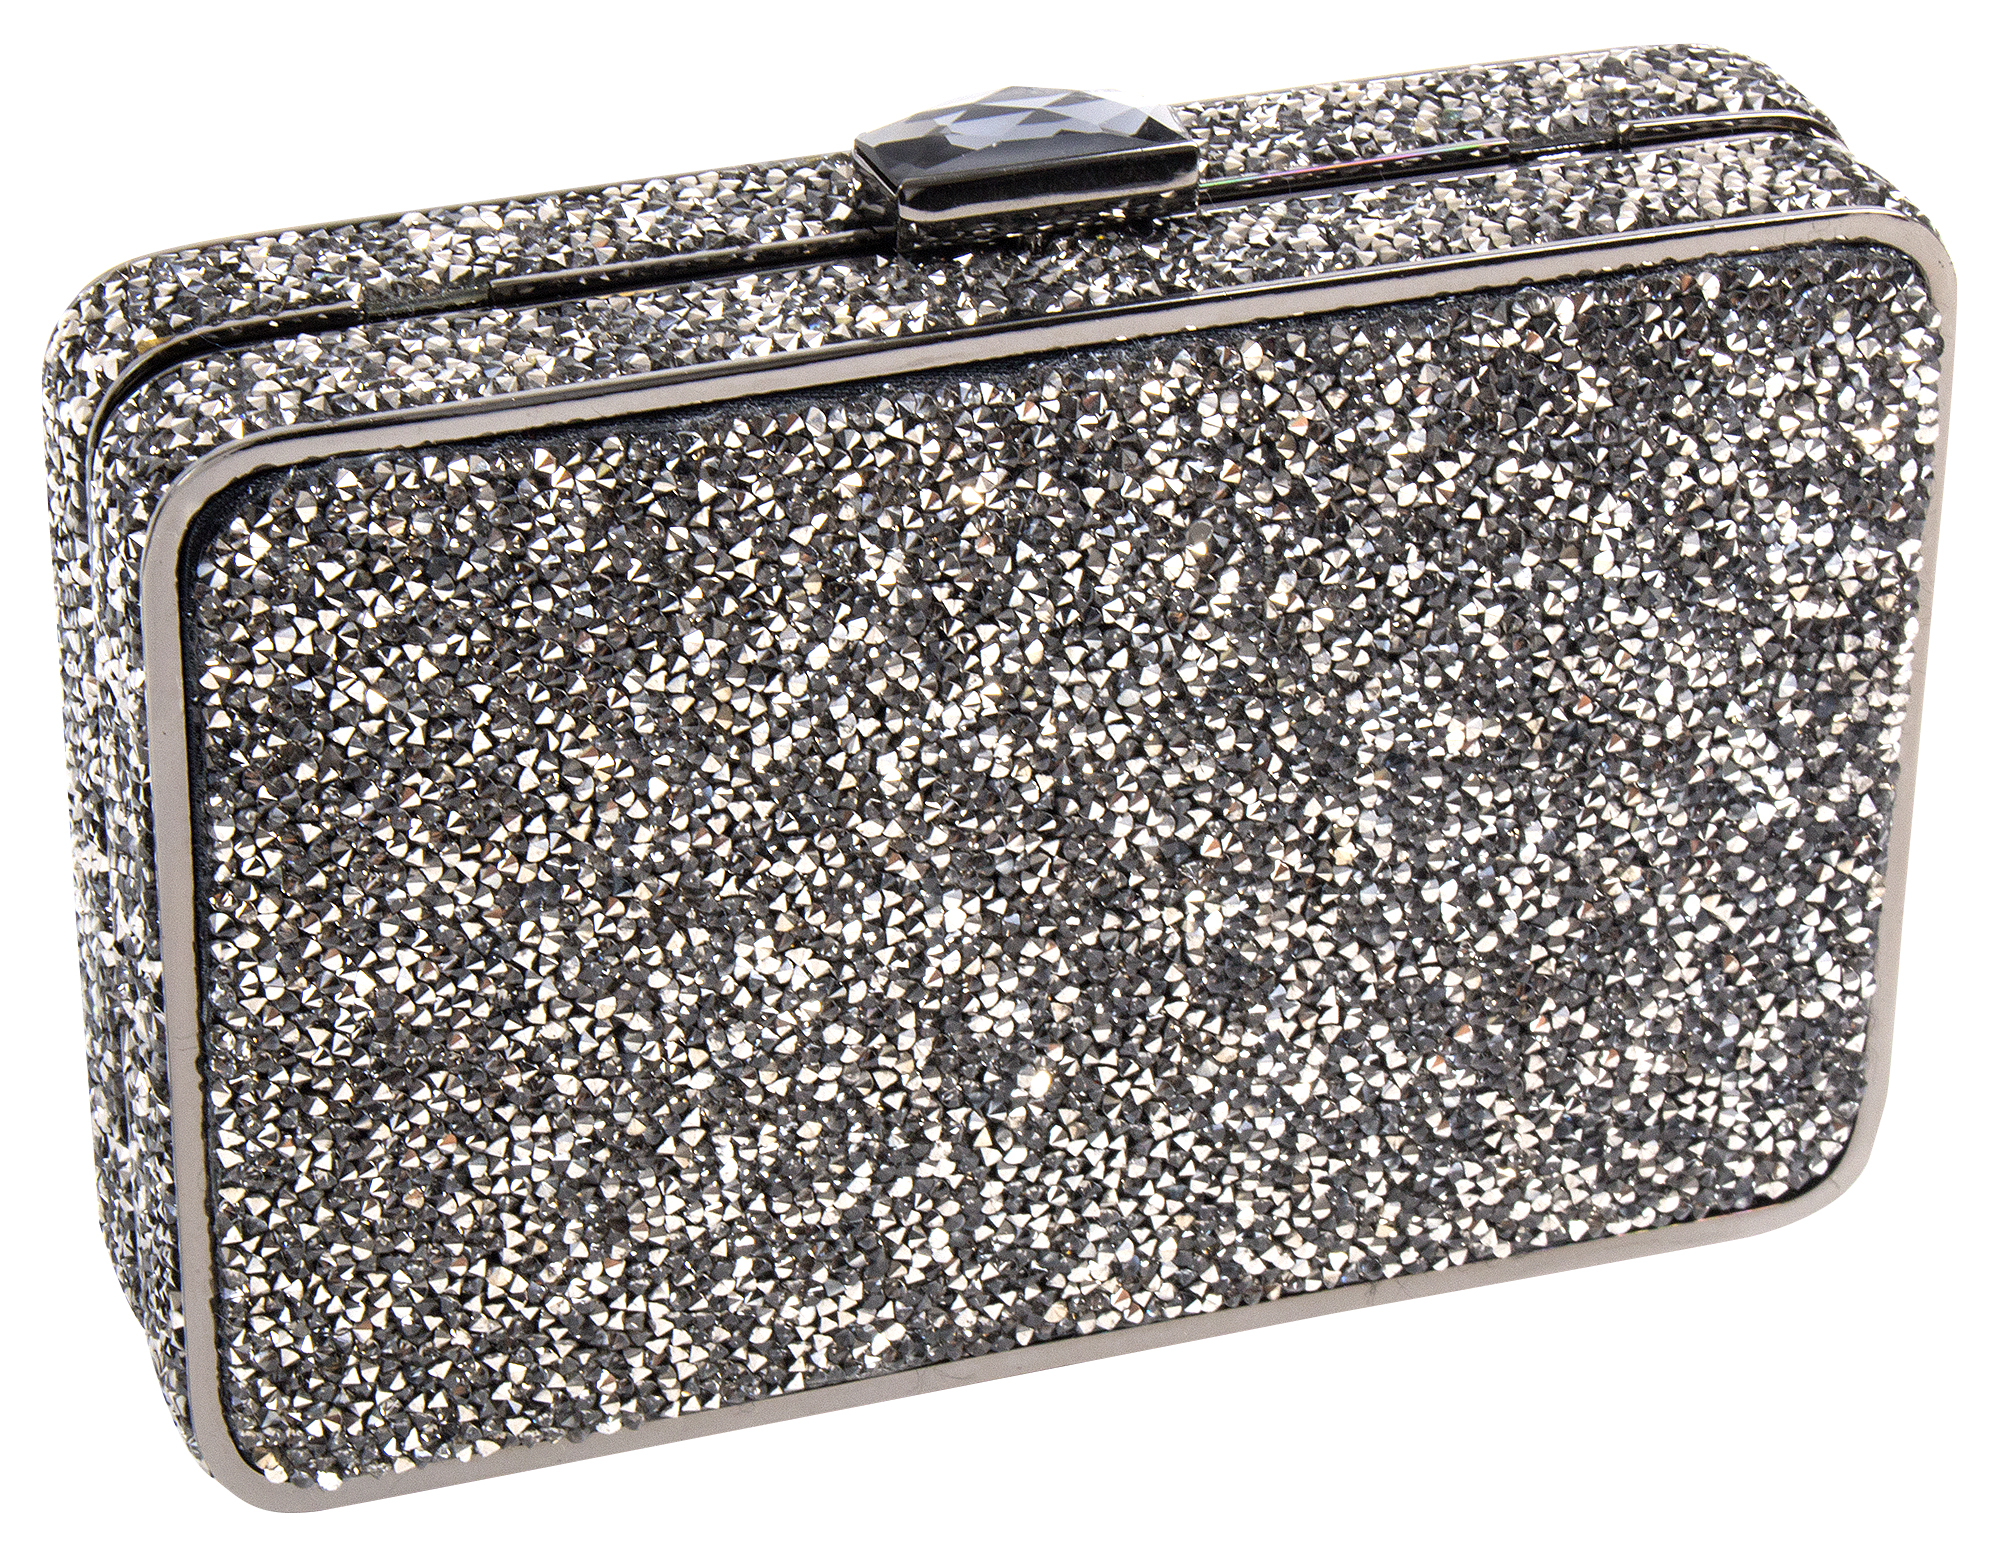 Sondra Roberts ”Glitter Clutch,” $277 at Out of Hand